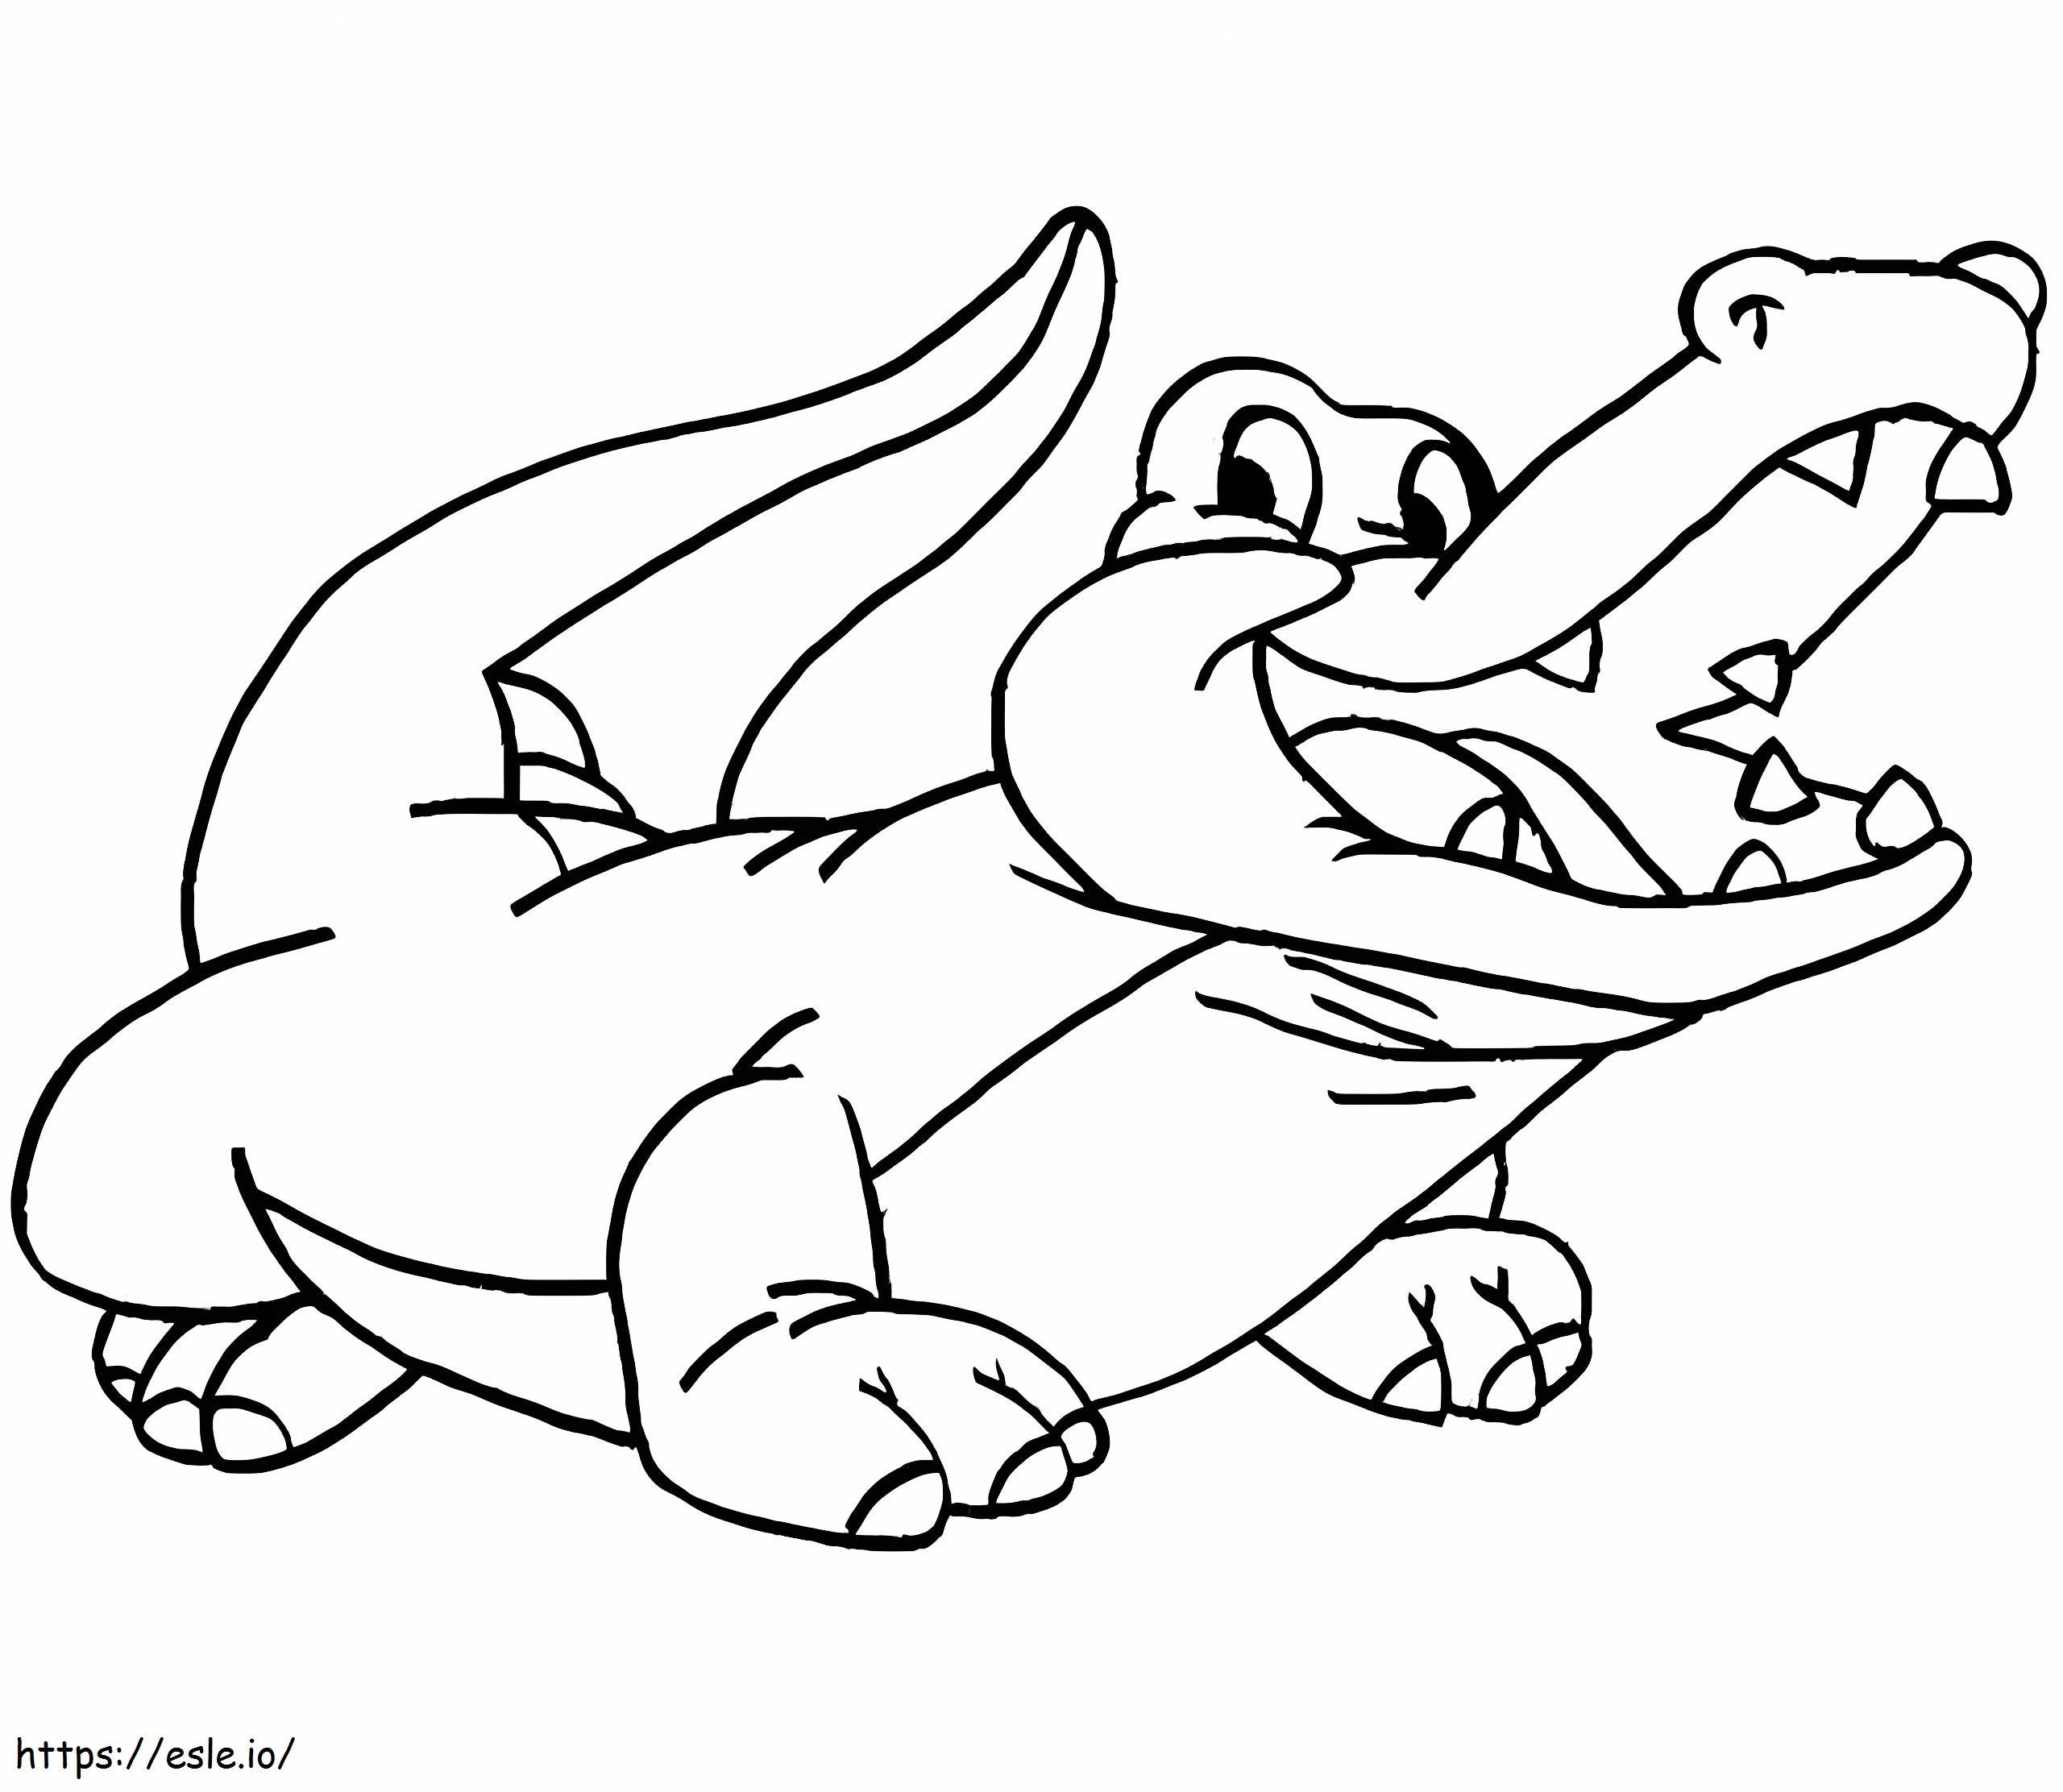 Cute Alligator For Kids coloring page